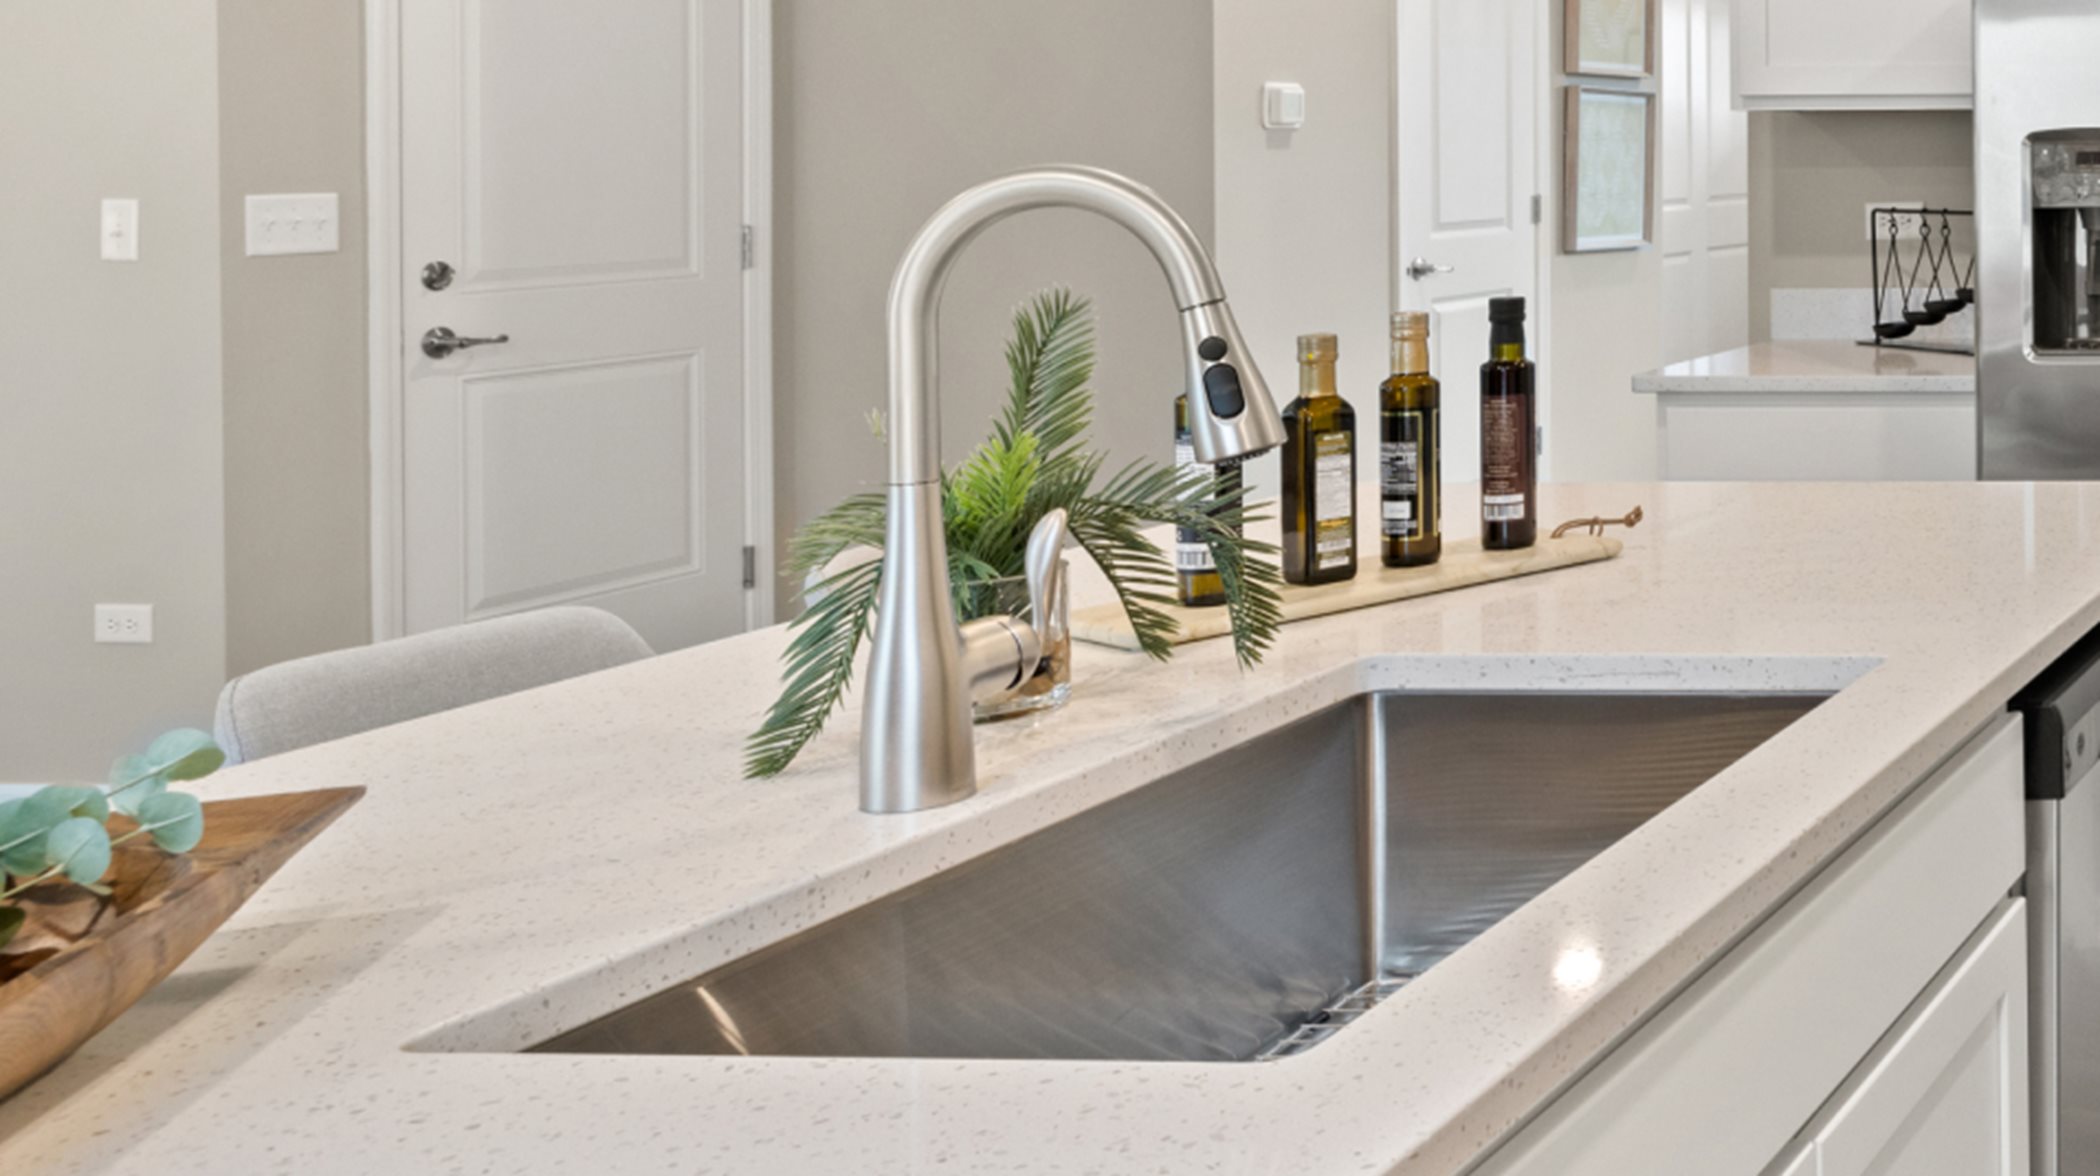 Undermount stainless steel sink with designer-selected faucet and pull-out spray